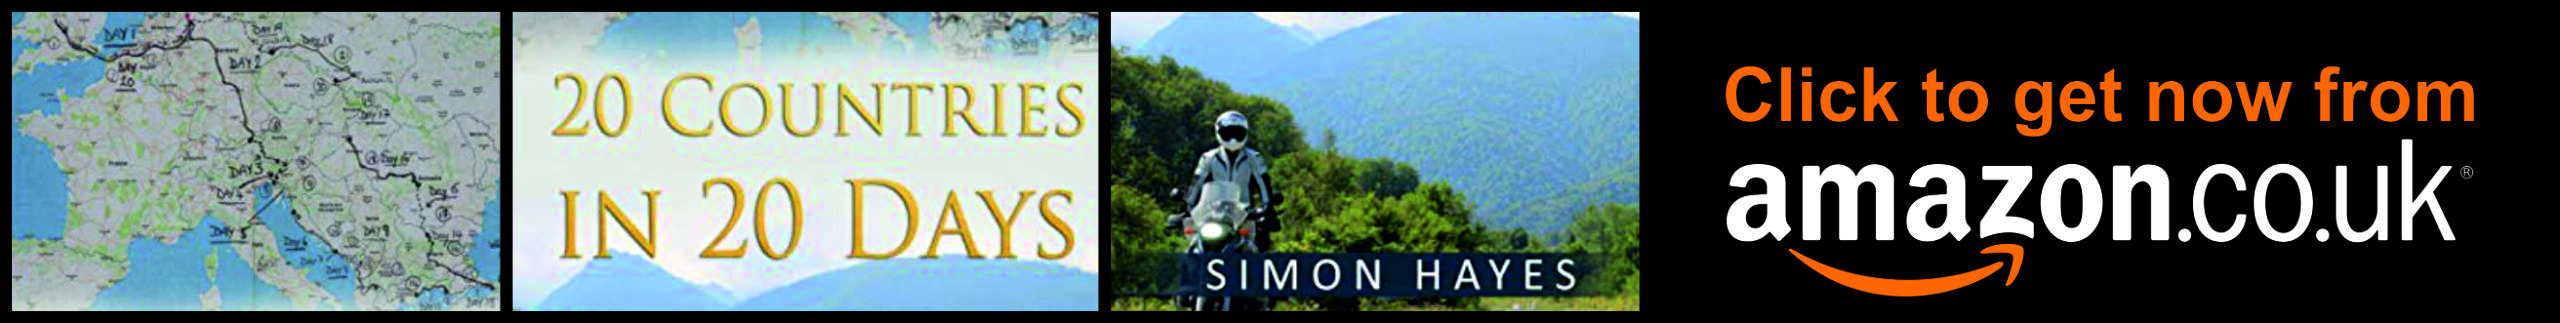 SHayes - 20 days book banner